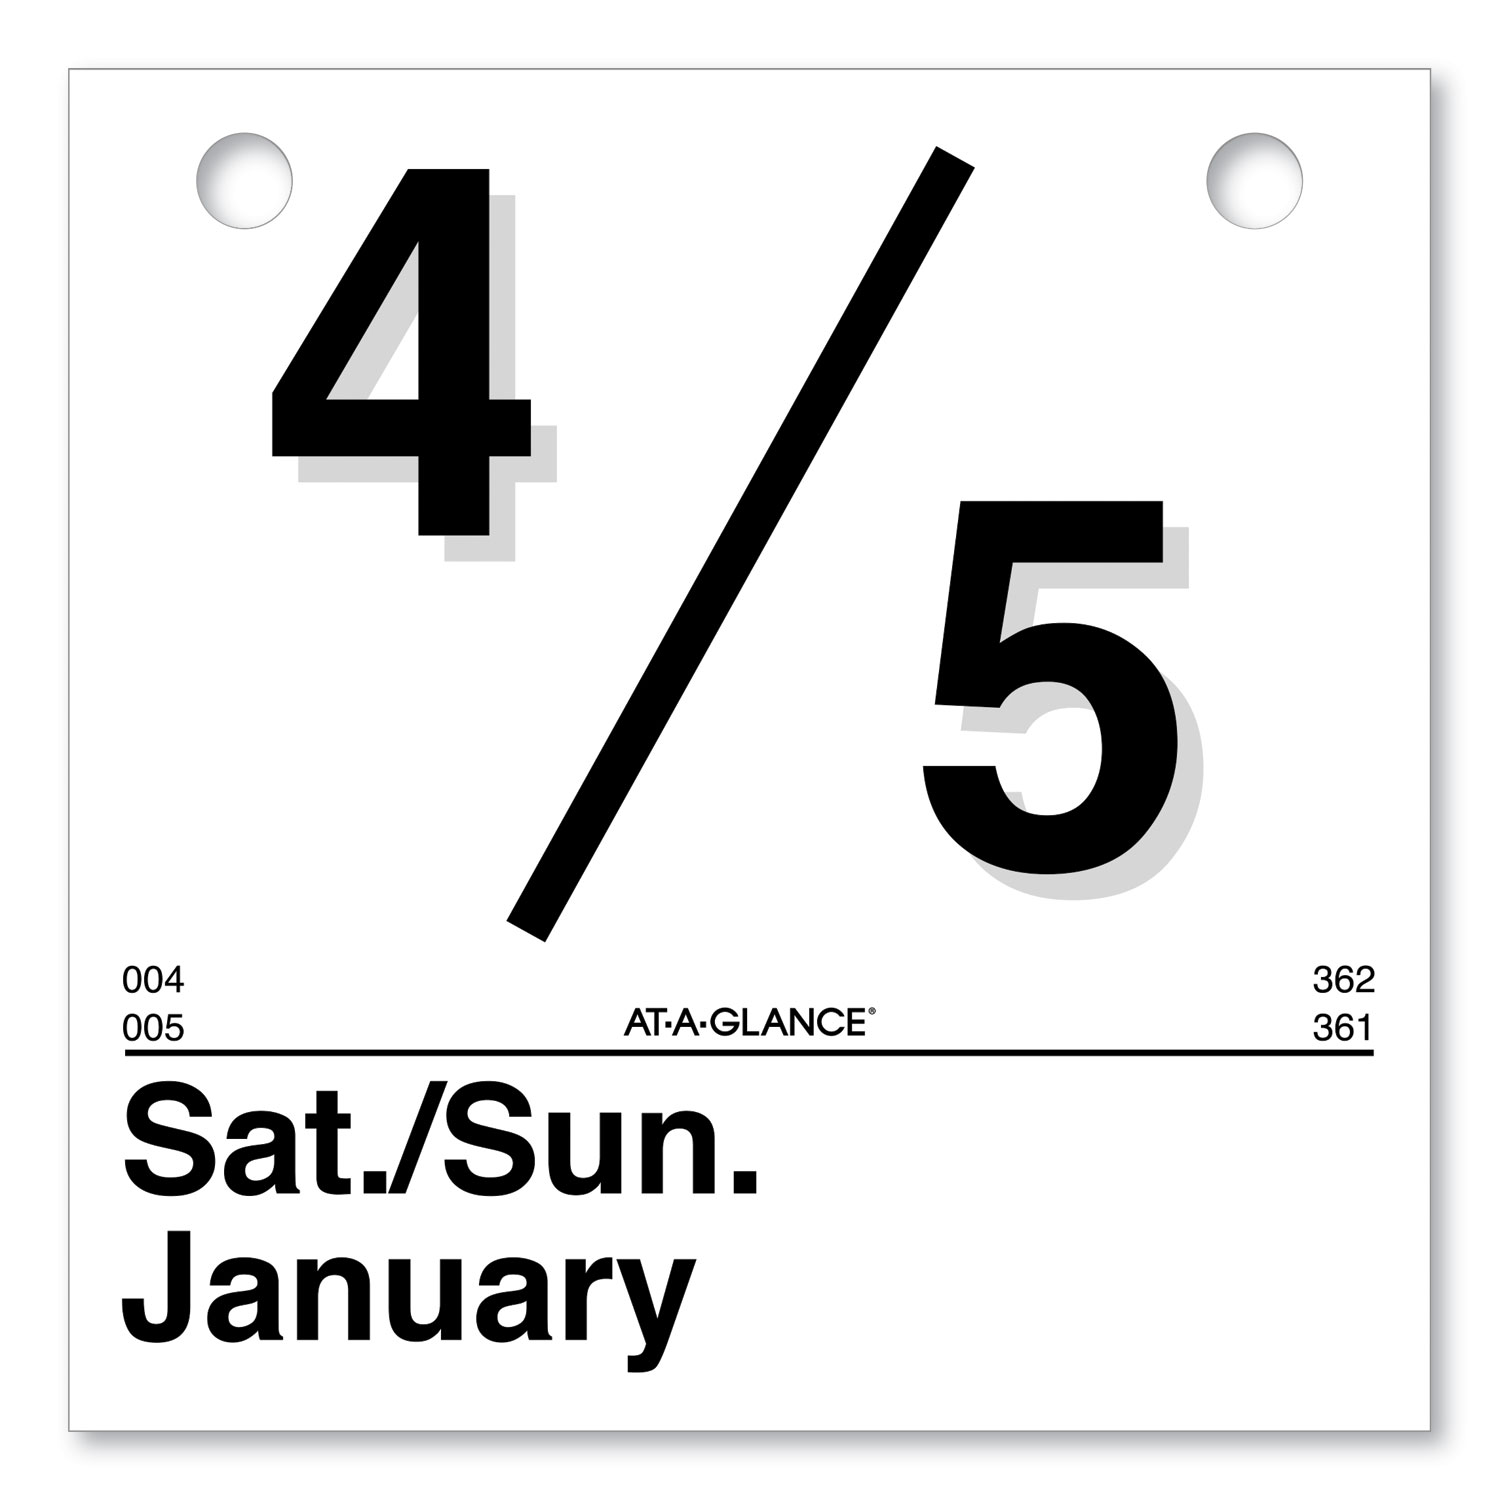 Today Is Wall Calendar, 9 3/8 x 12, White, 2020